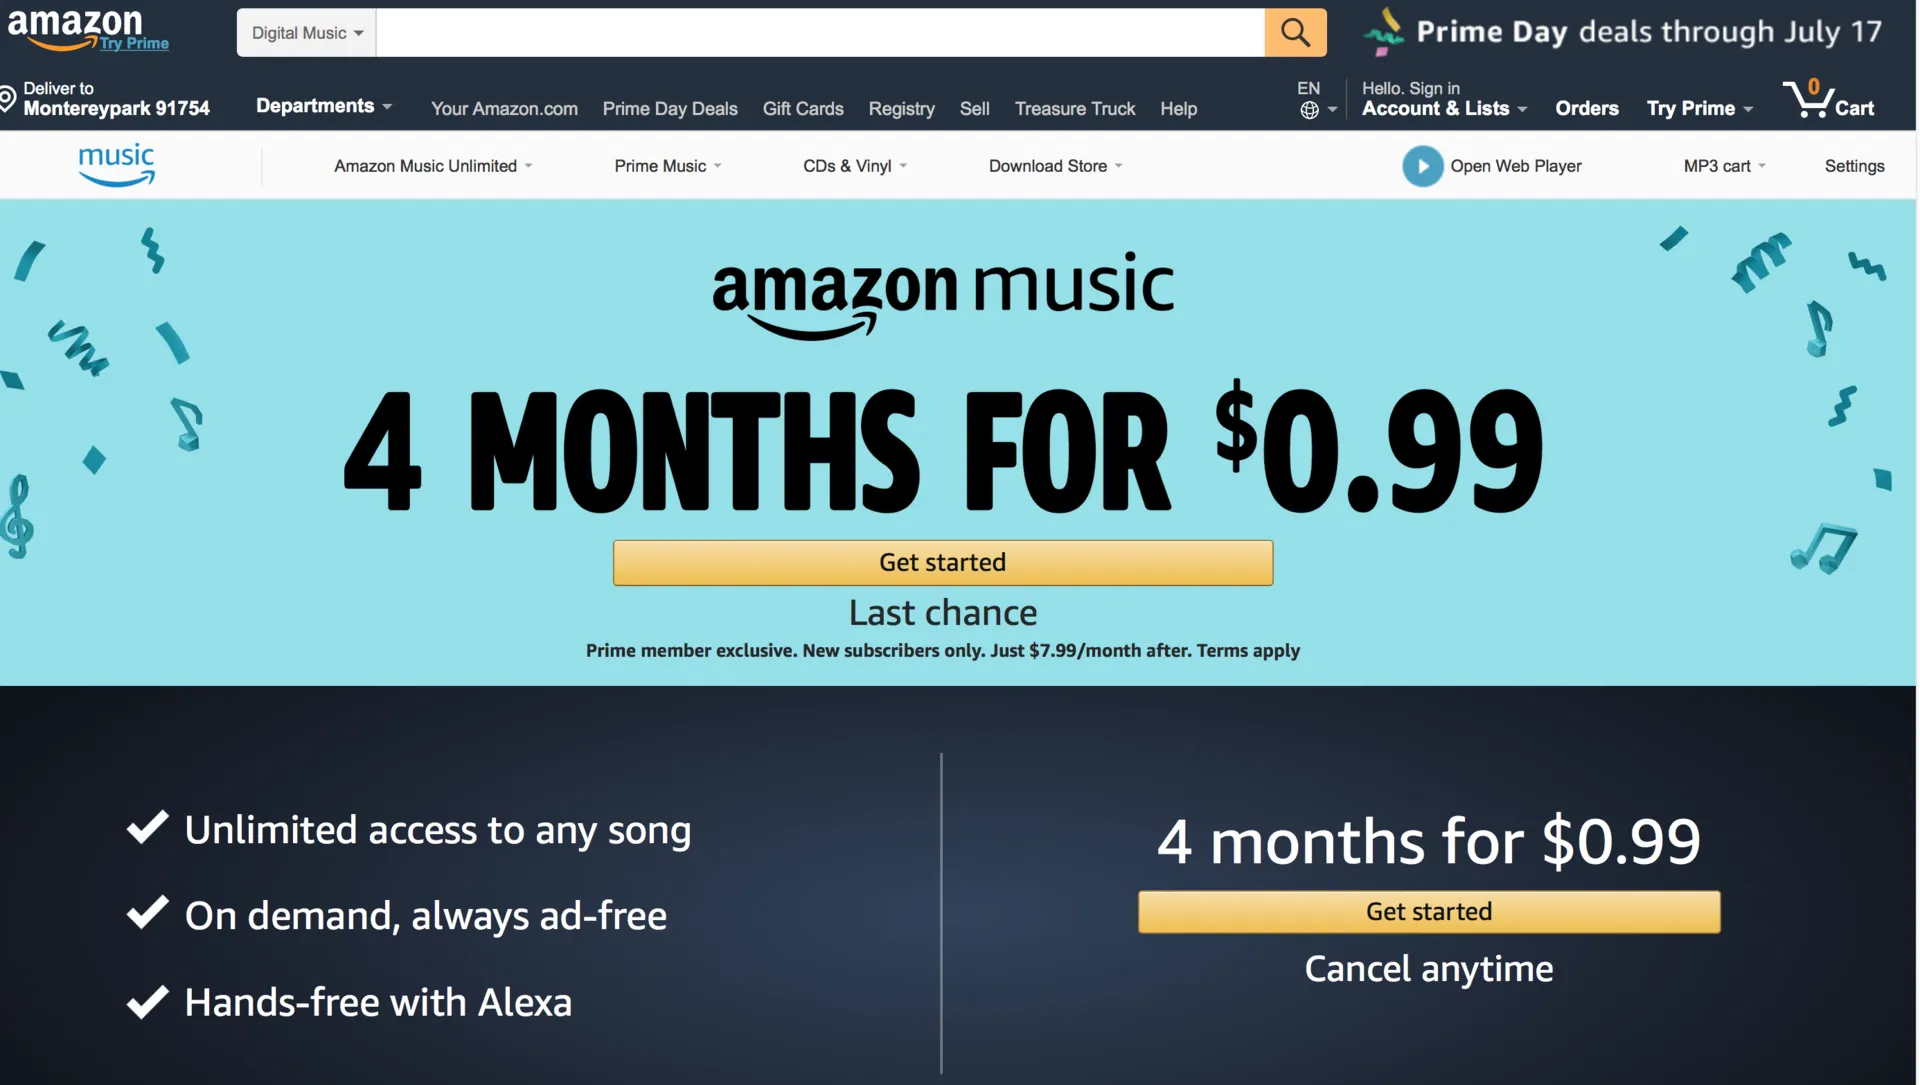 $0.99 for 4 Month Music Trial